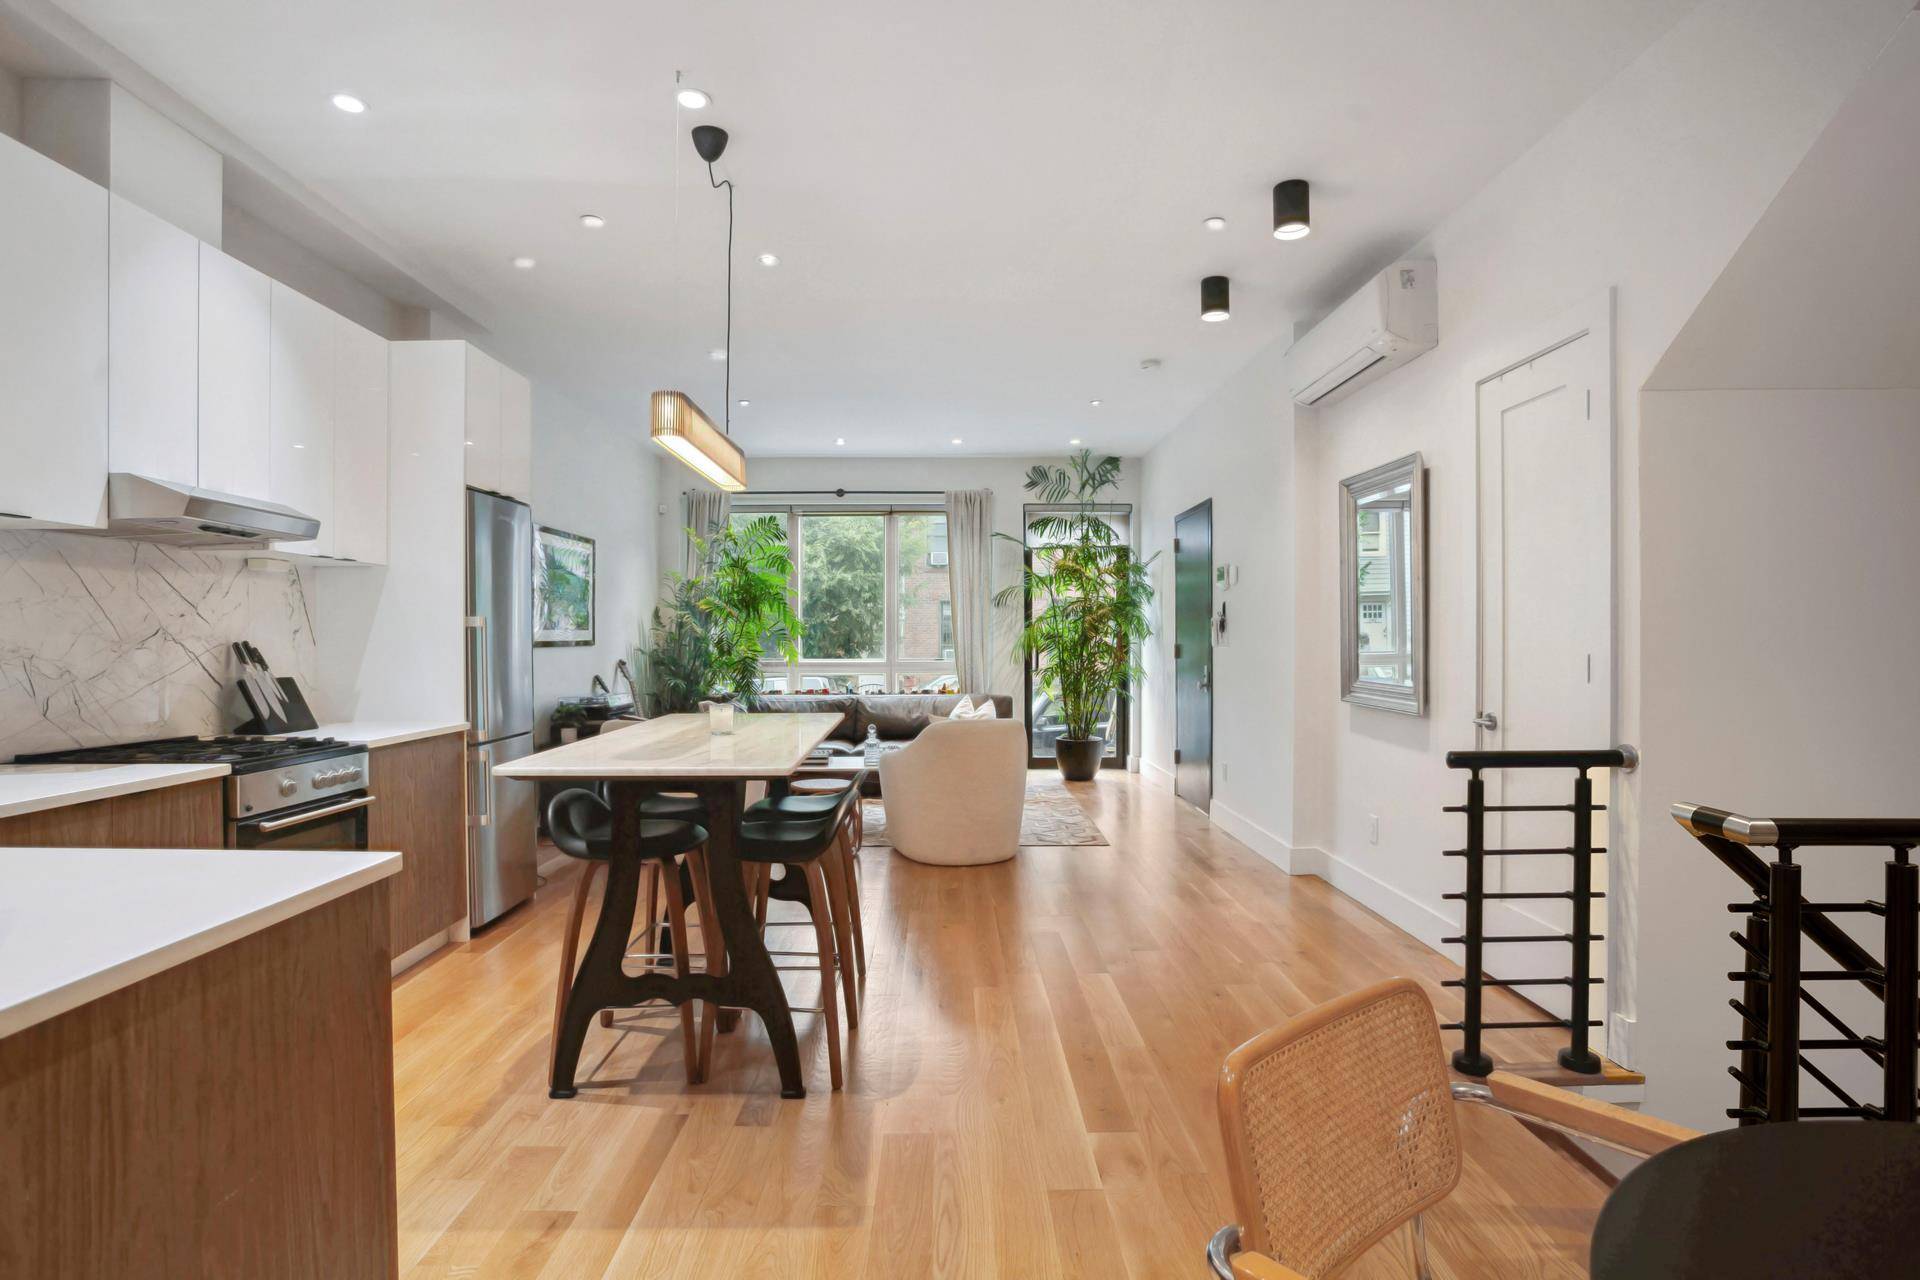 Offering the perfect combination of indoor and outdoor living in an intimate new boutique condominium development built in 2020 in the sought after Greenwood section of Park Slope, this duplex ...